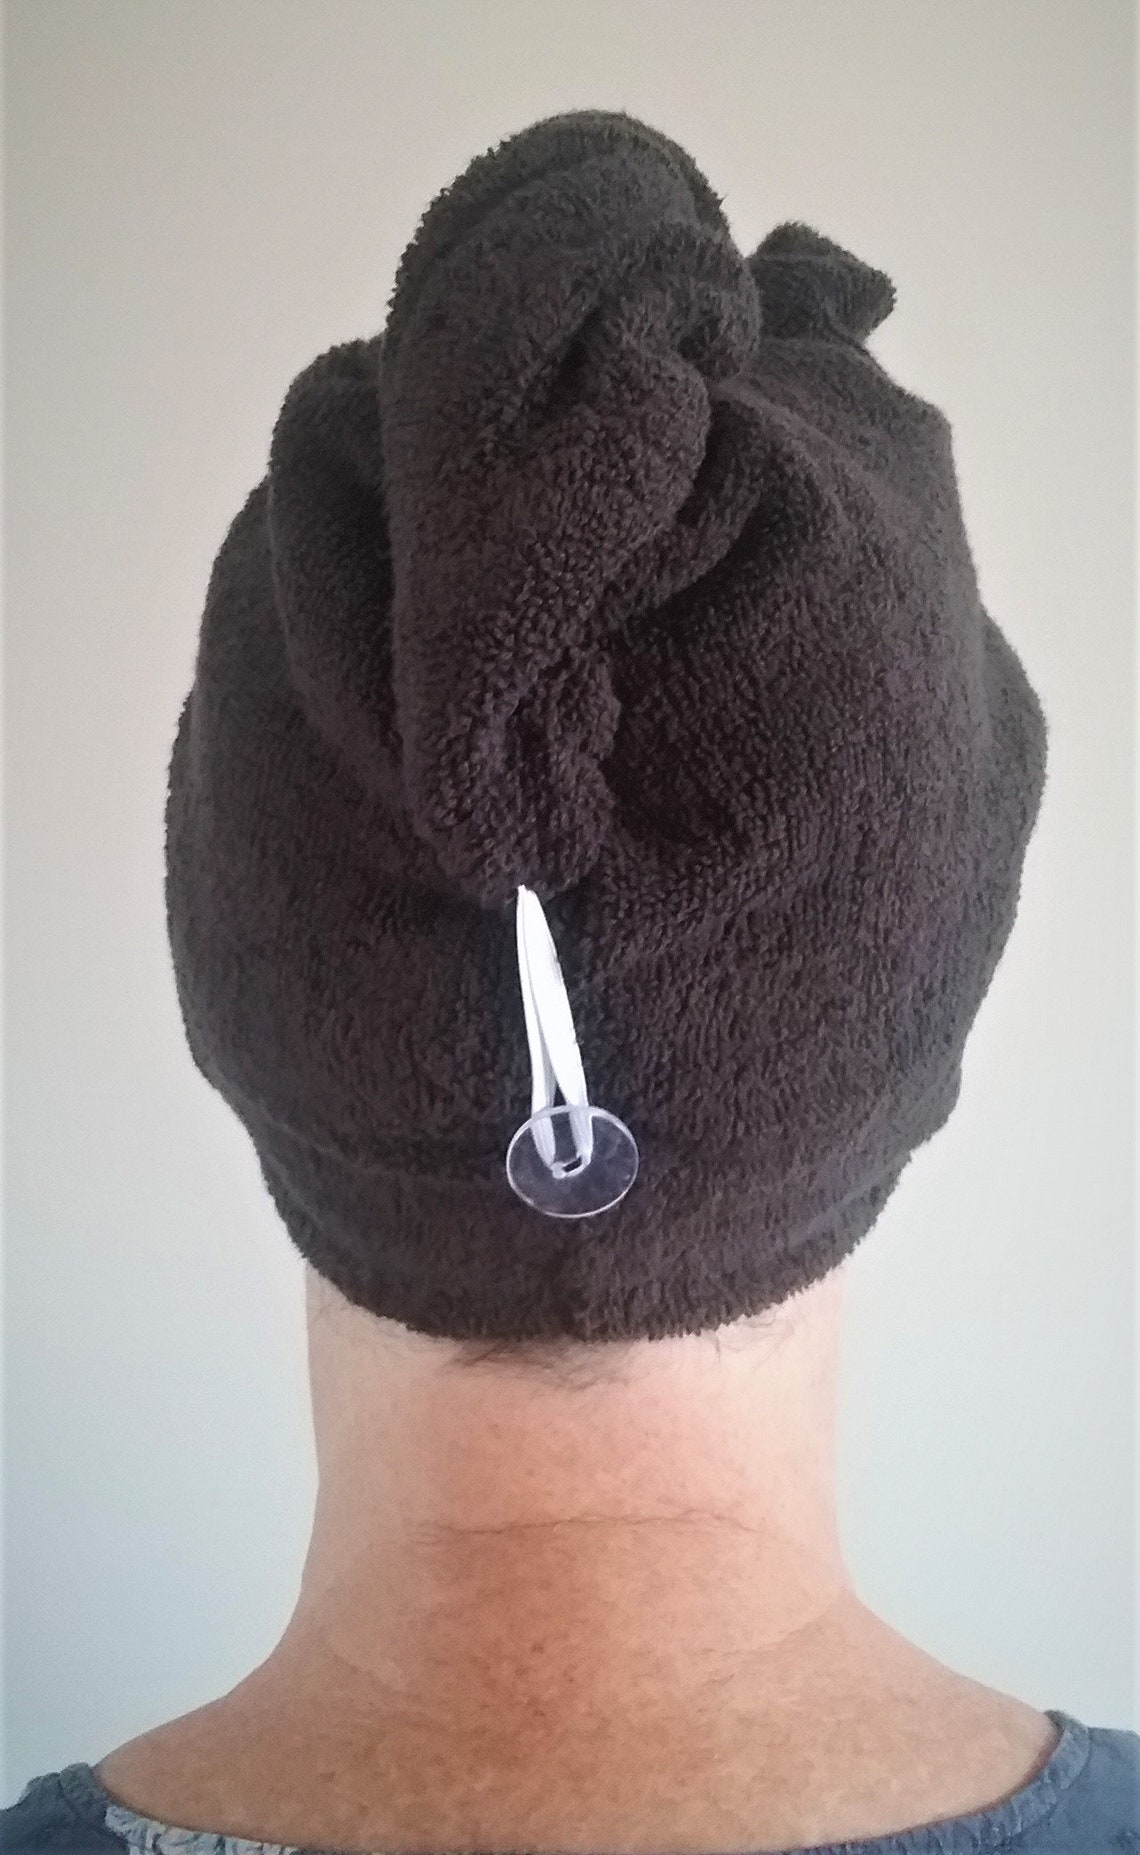 Hair Turban Towel In Black 100 Cotton Absorbent Soft Wrap With Loop